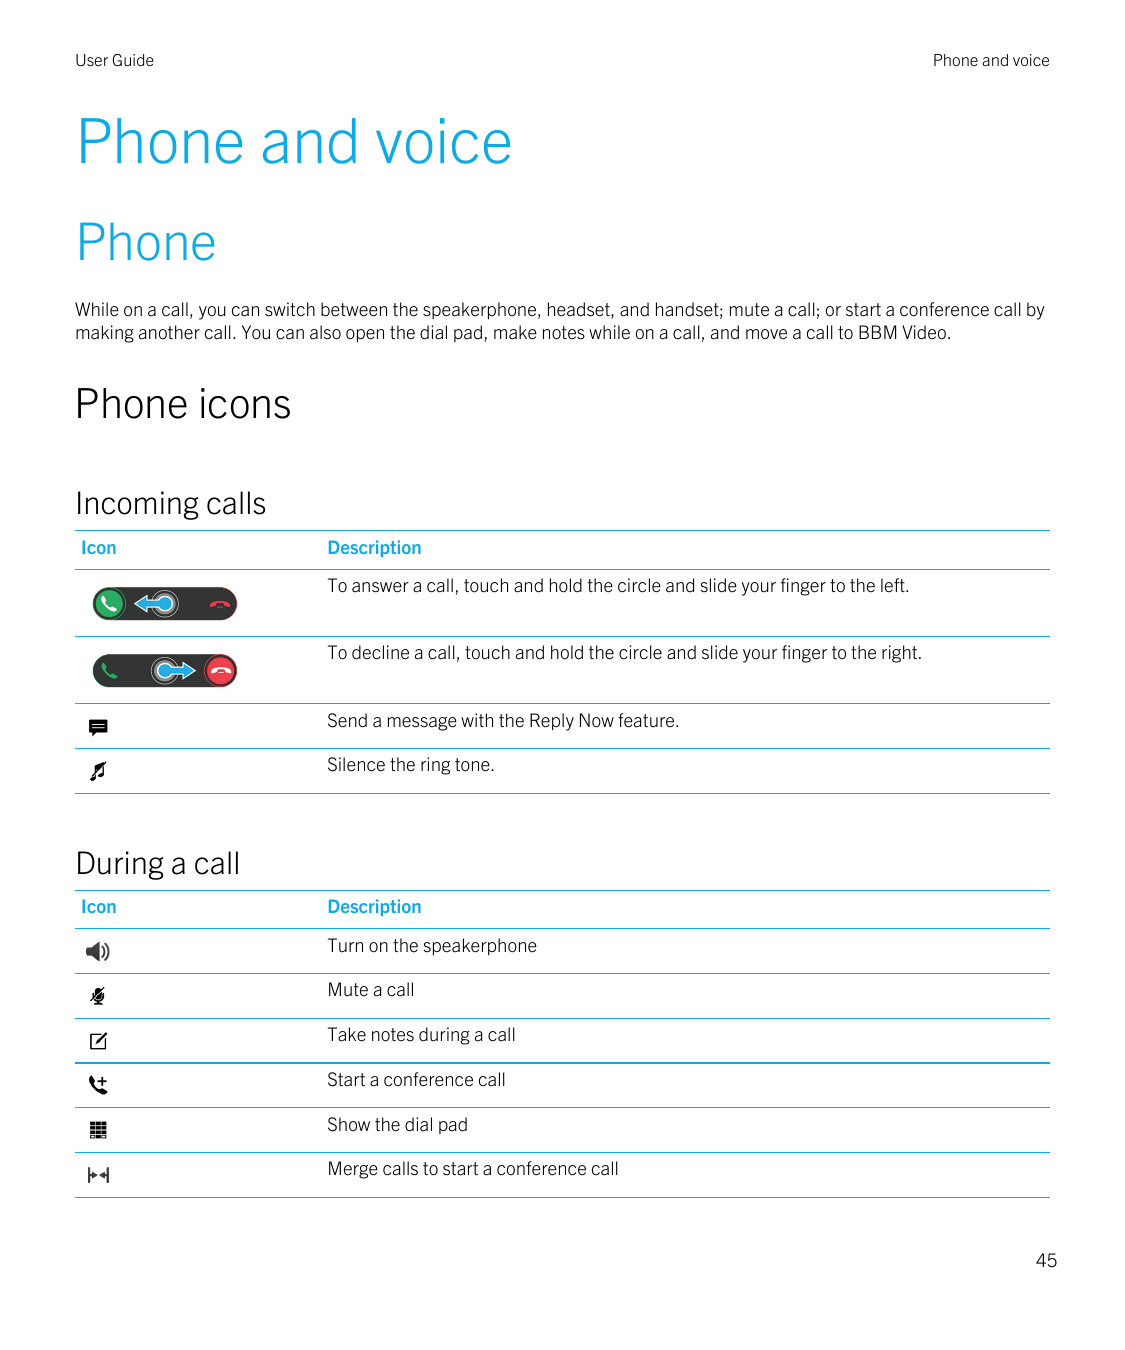 User GuidePhone and voicePhone and voicePhoneWhile on a call, you can switch between the speakerphone, headset, and handset; mut